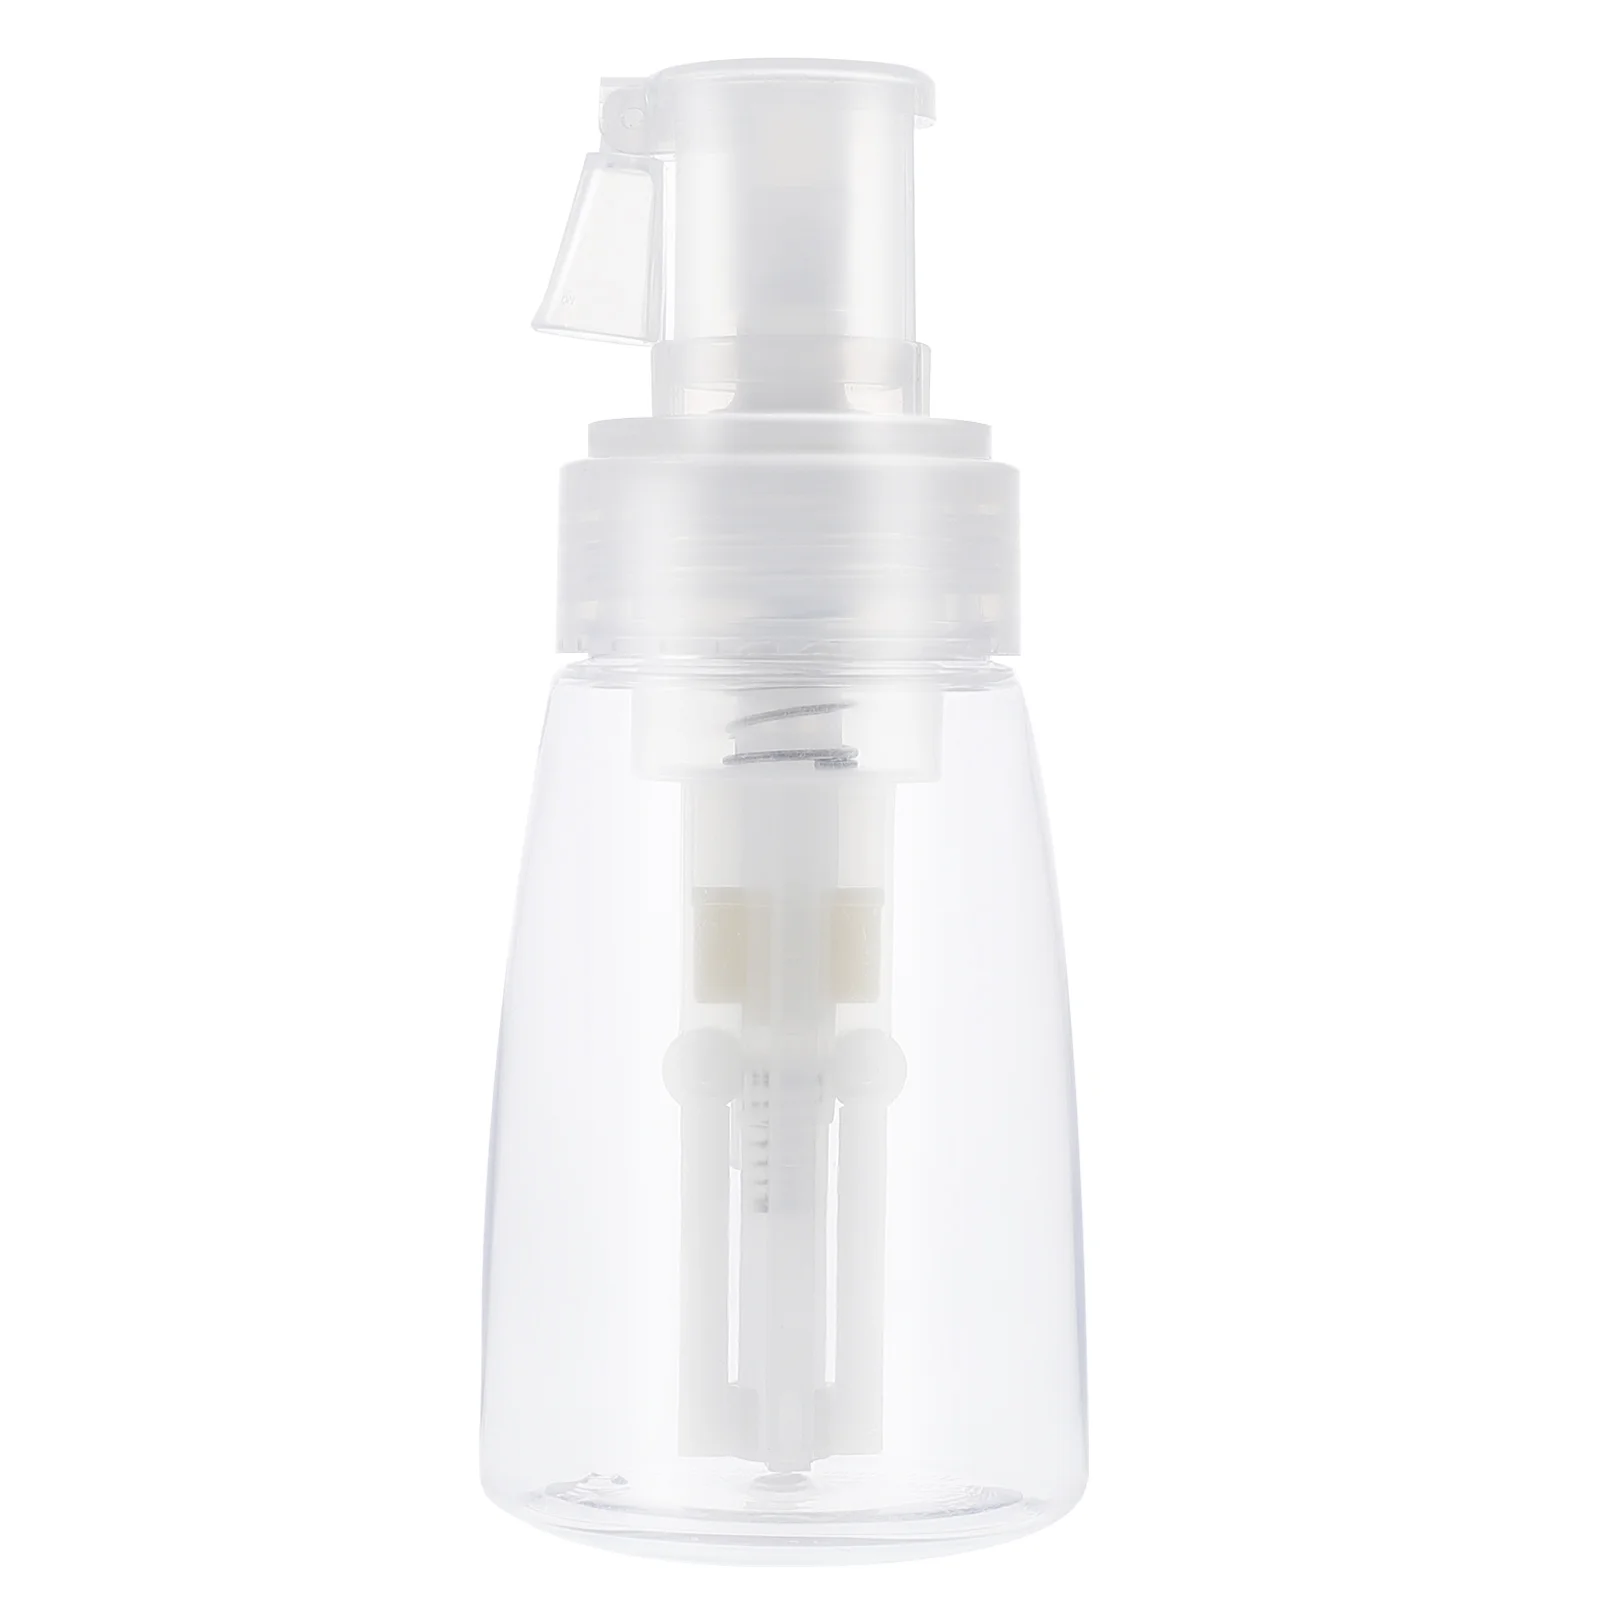 Powder Spray Bottle Baby Care Storage Loose Puff Empty Trip Holder Plastic Containers Clothes